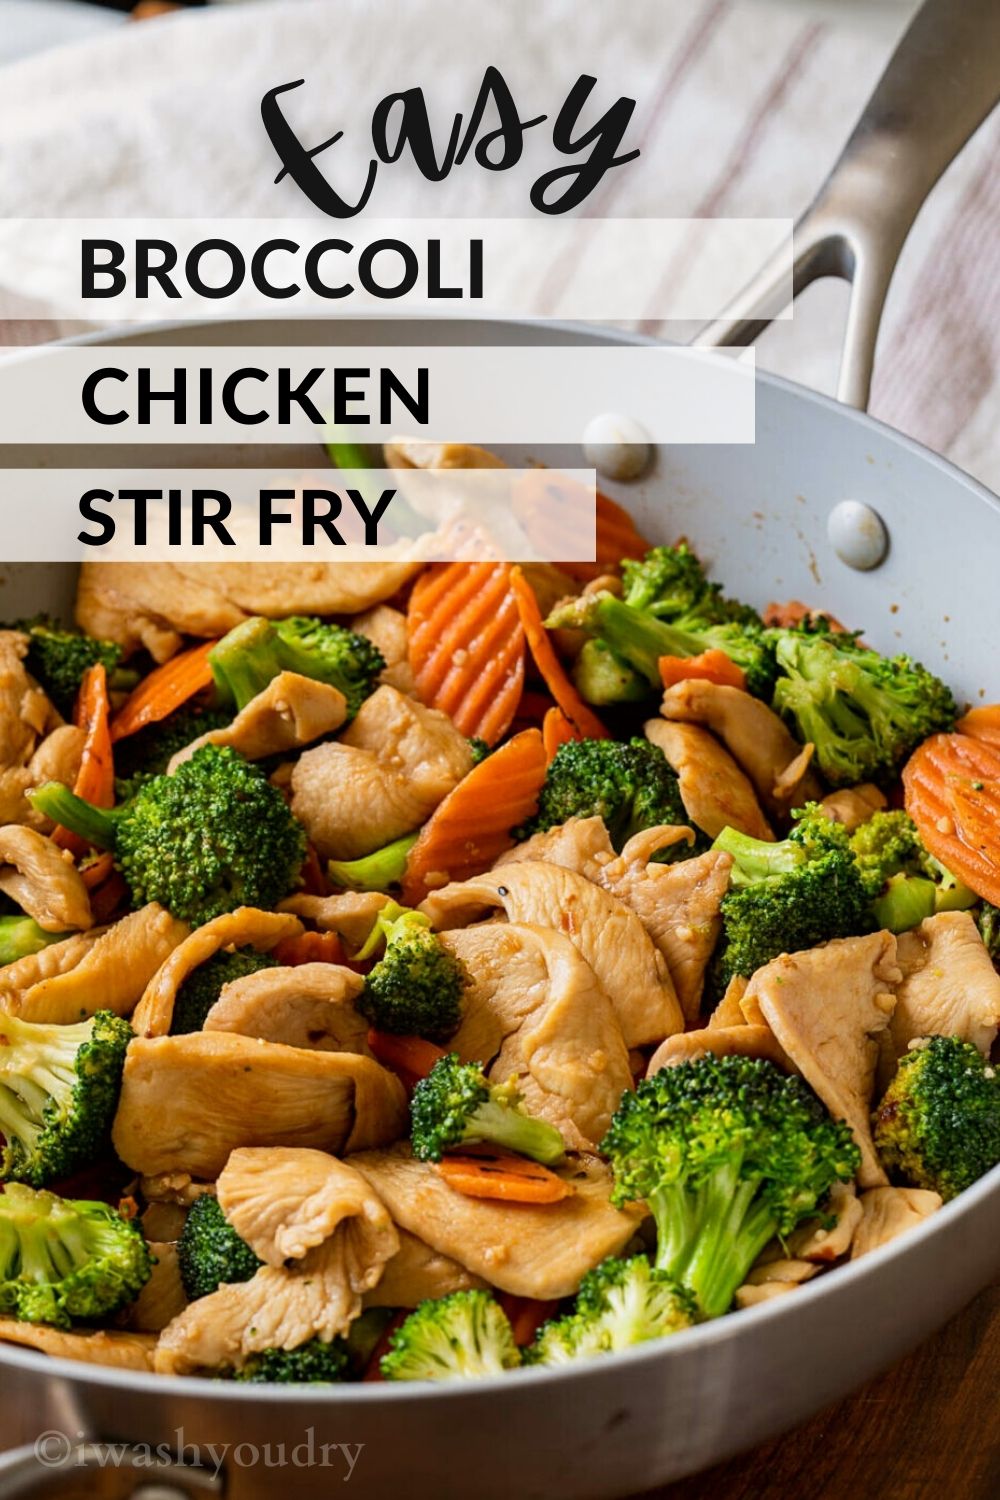 Cooked broccoli chicken stir fry in pan with text overlay.